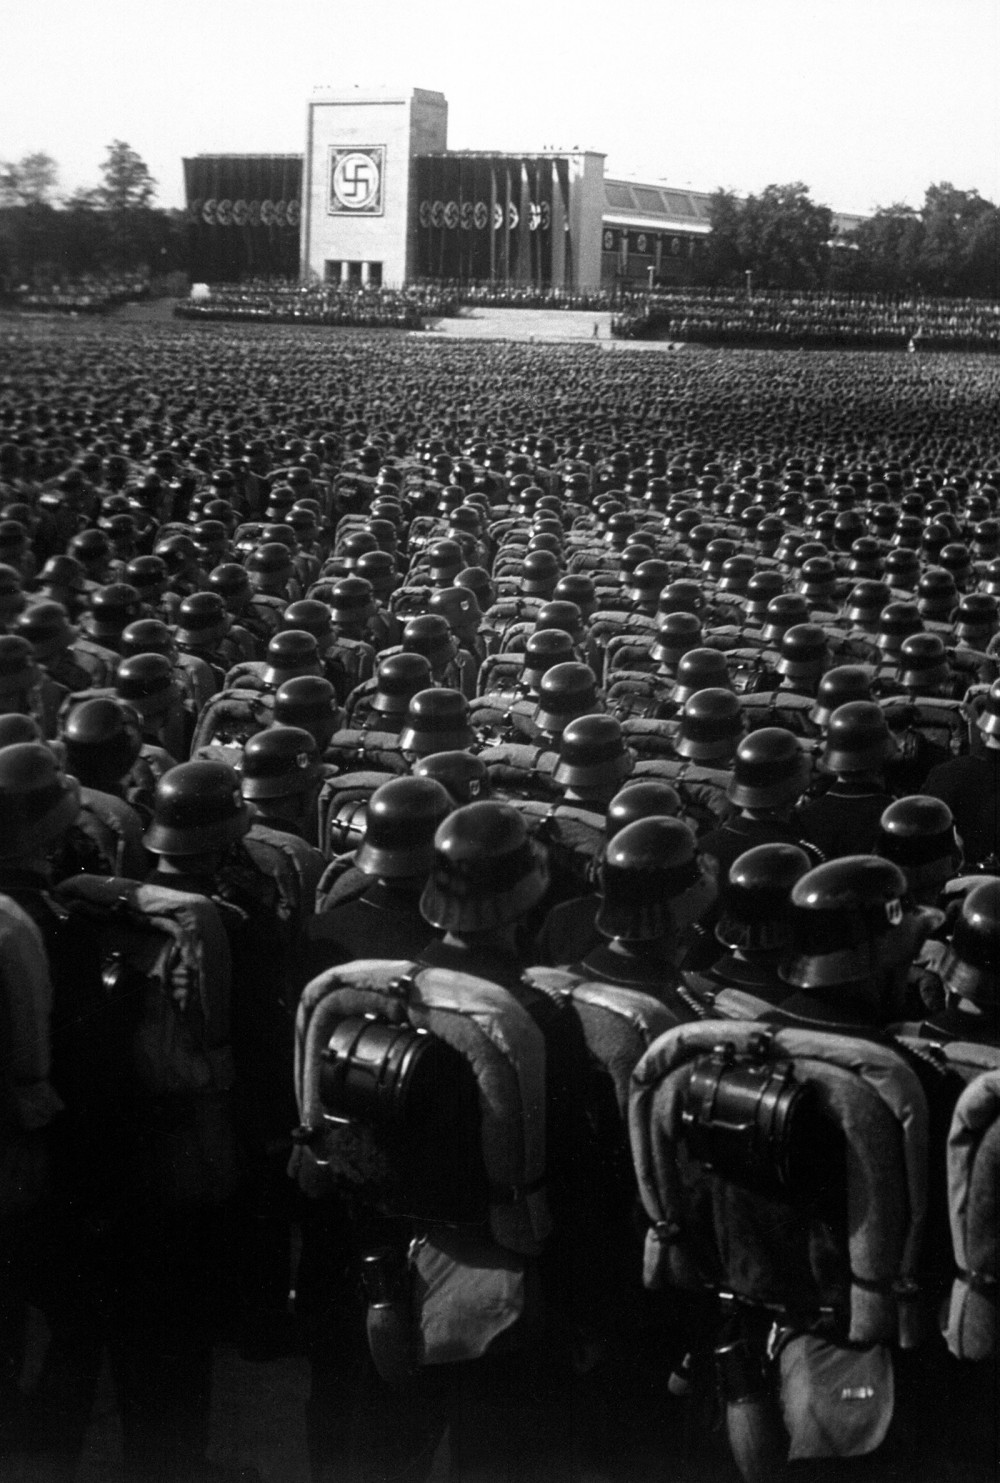 Photograph of thousands of German soldiers in uniform at a Nuremberg rally. 